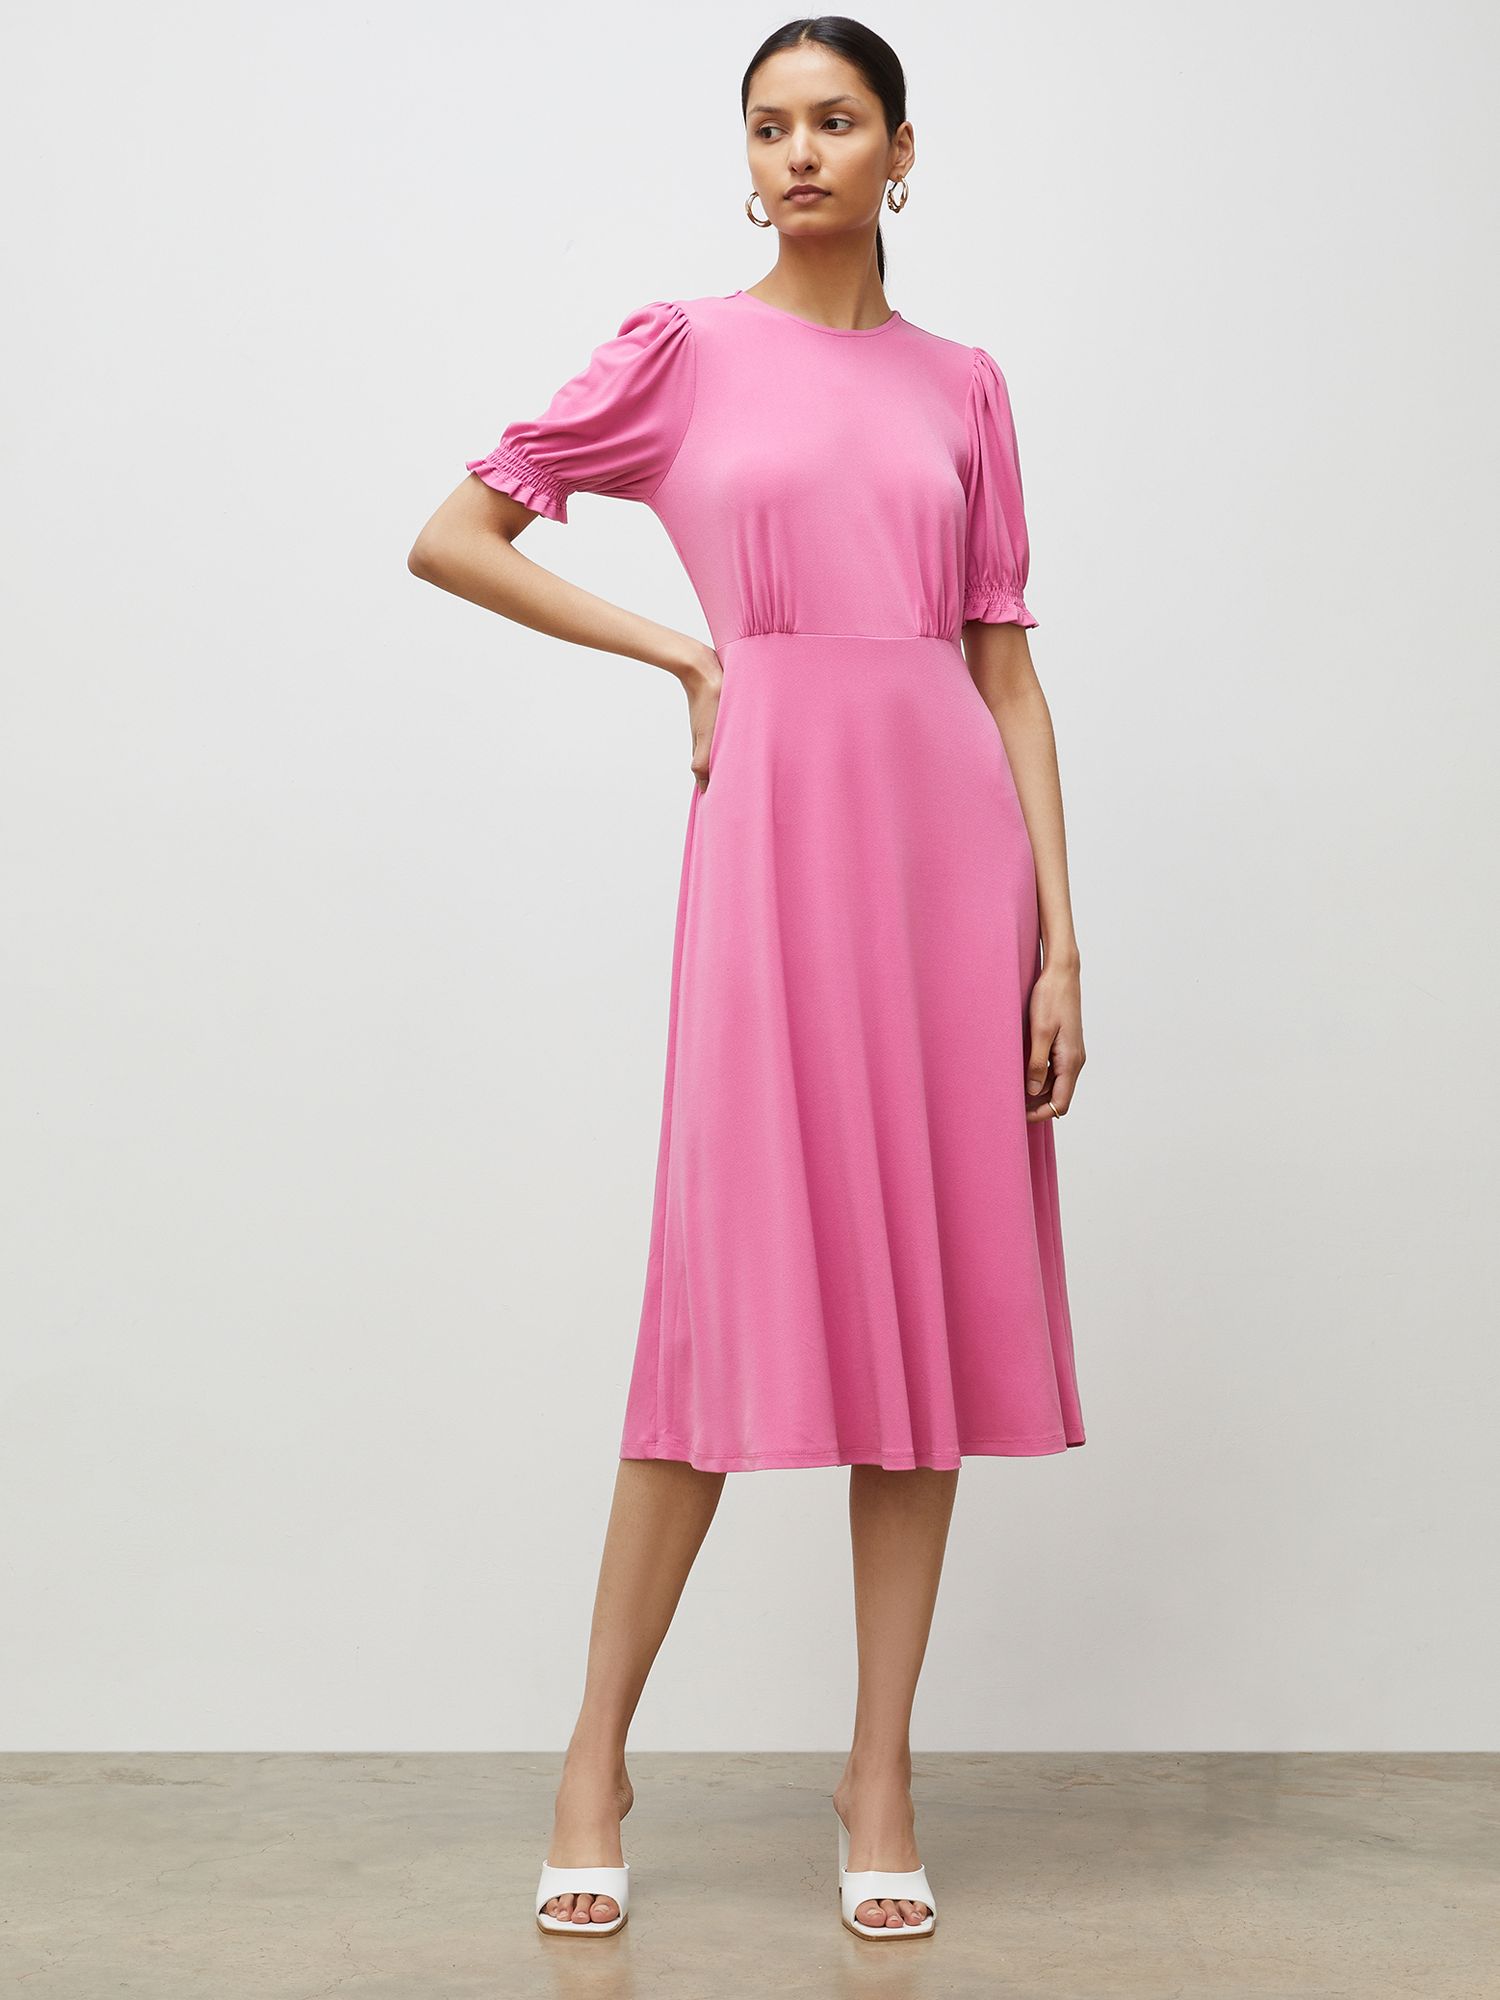 Finery Lilybelle Crepe Midi Dress, Pink at John Lewis & Partners